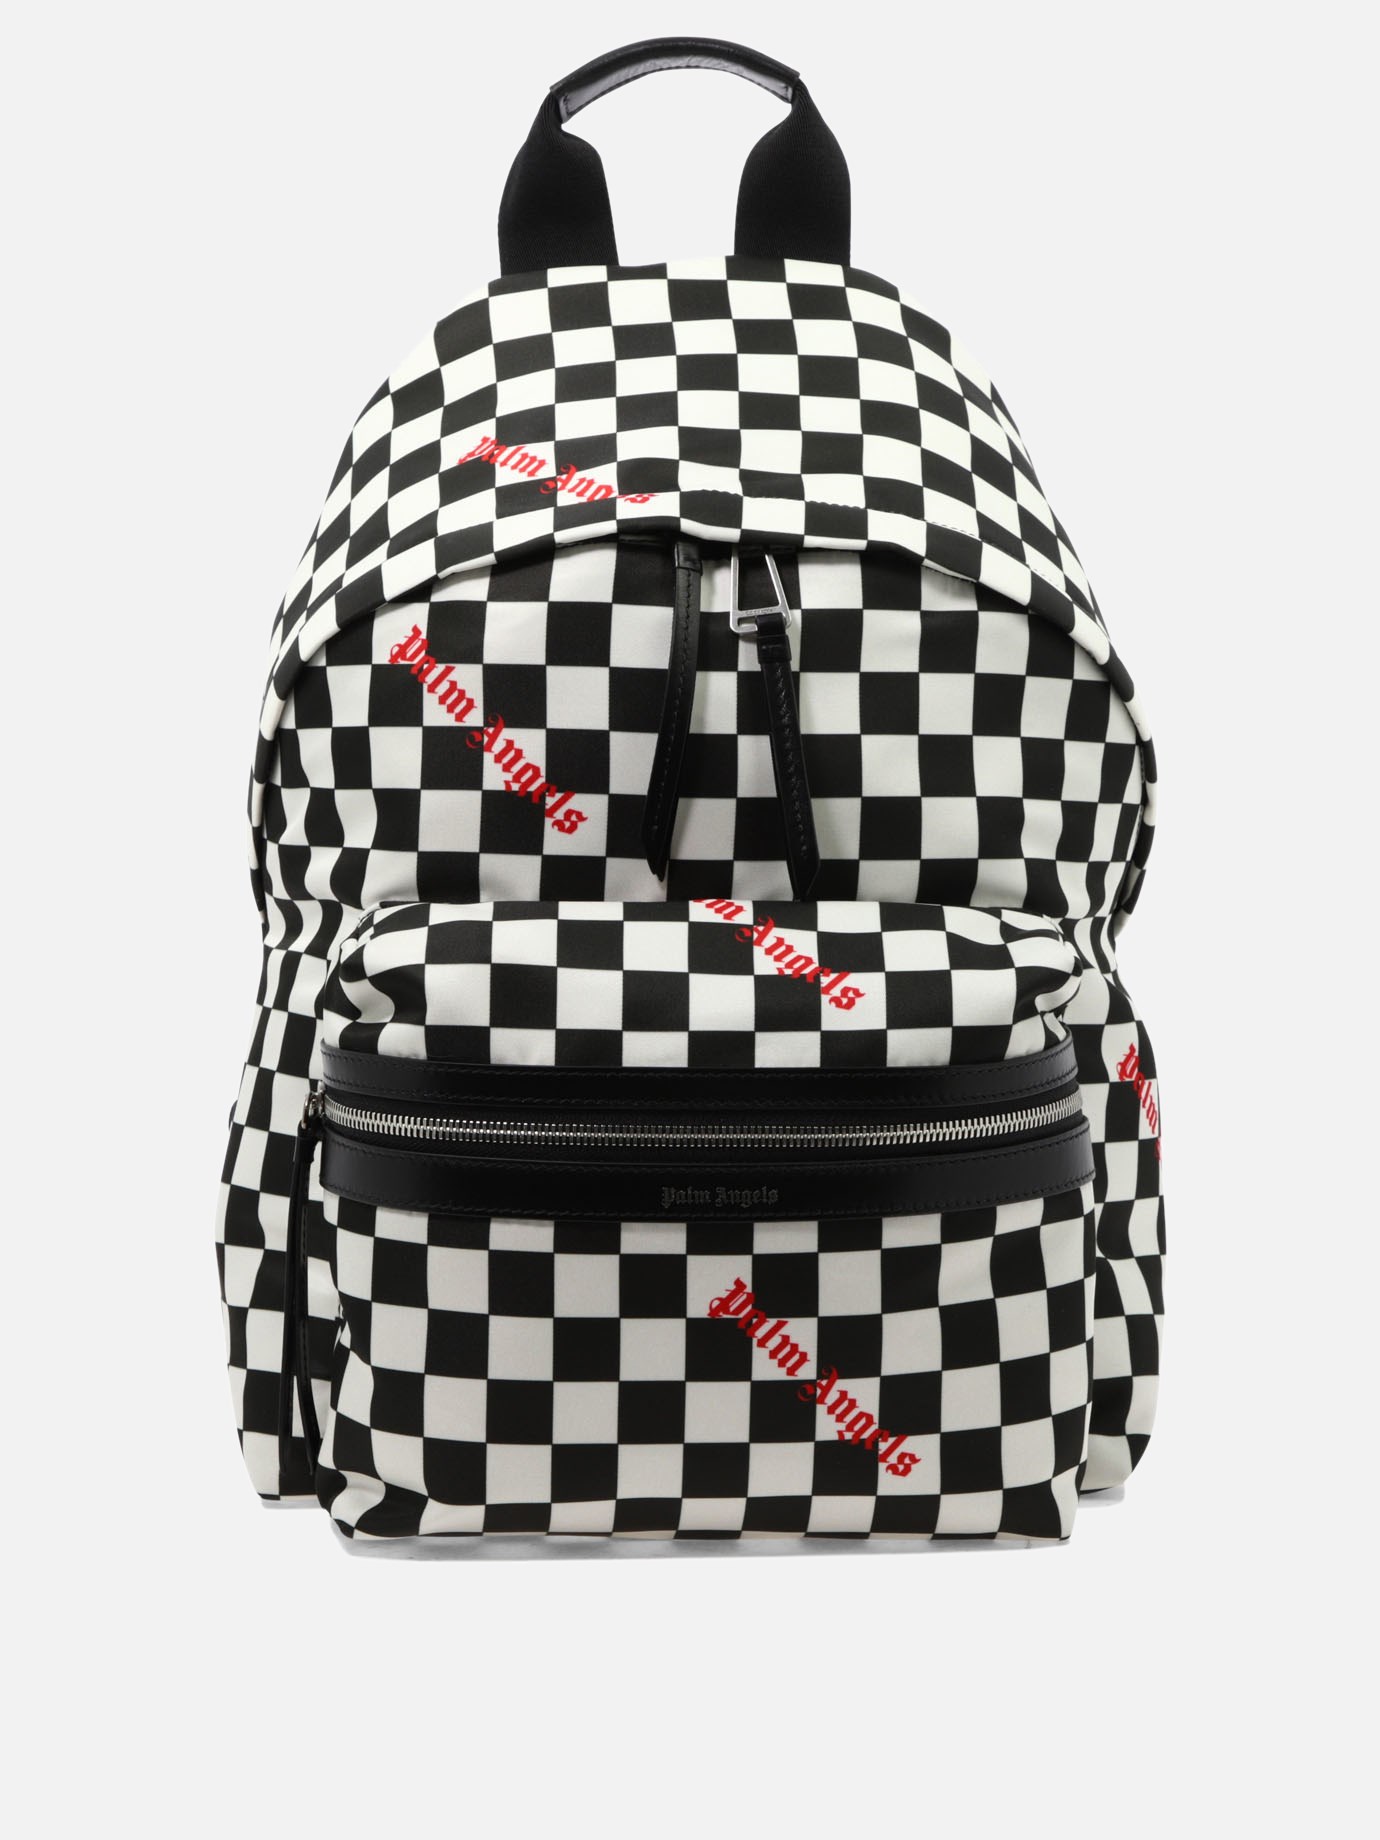  Printed Damier  backpackby Palm Angels - 1